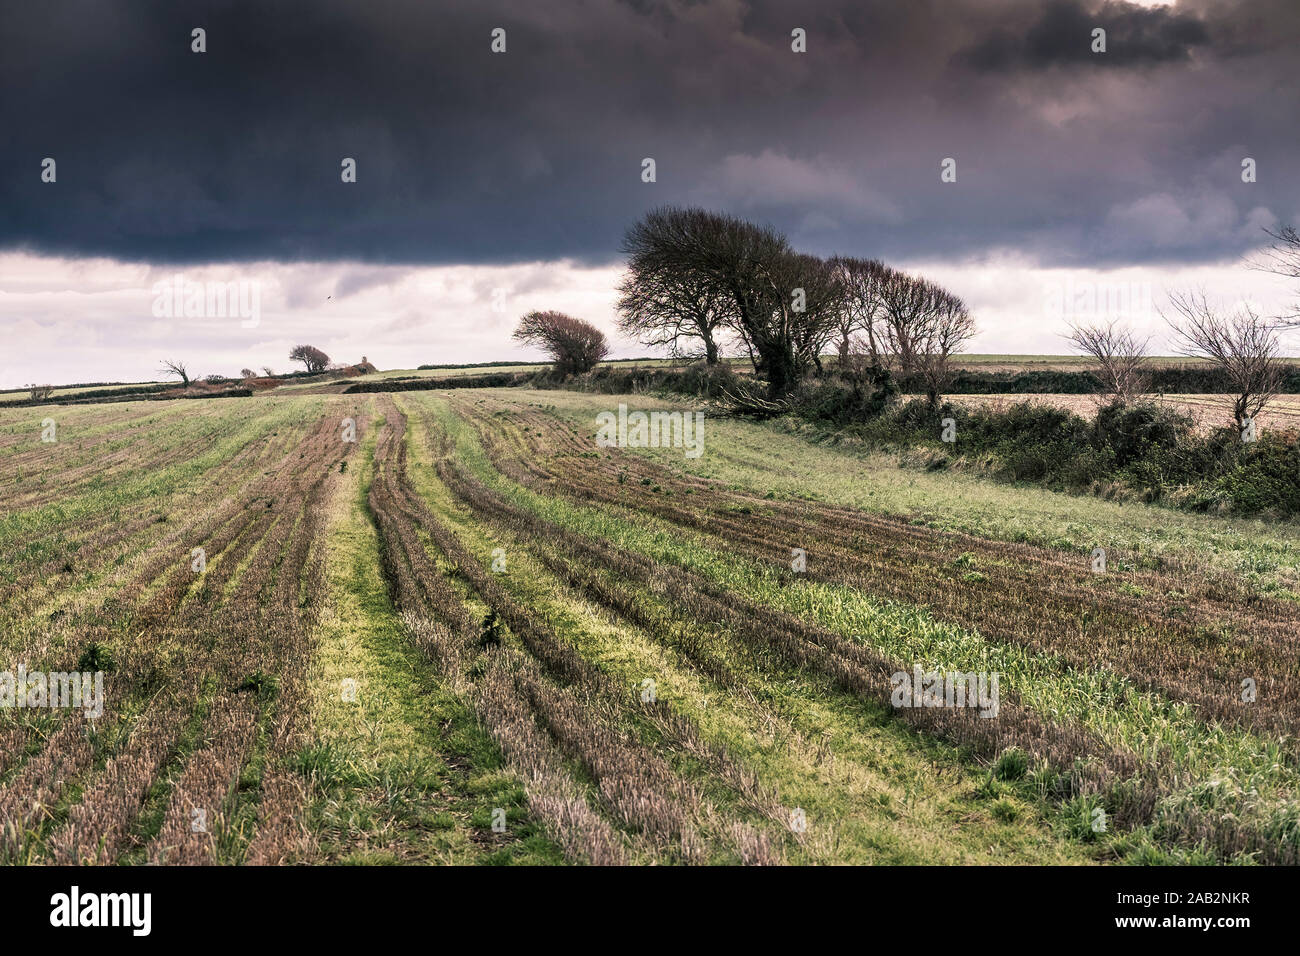 Thunder storm building over farmland in Cornwall. Stock Photo